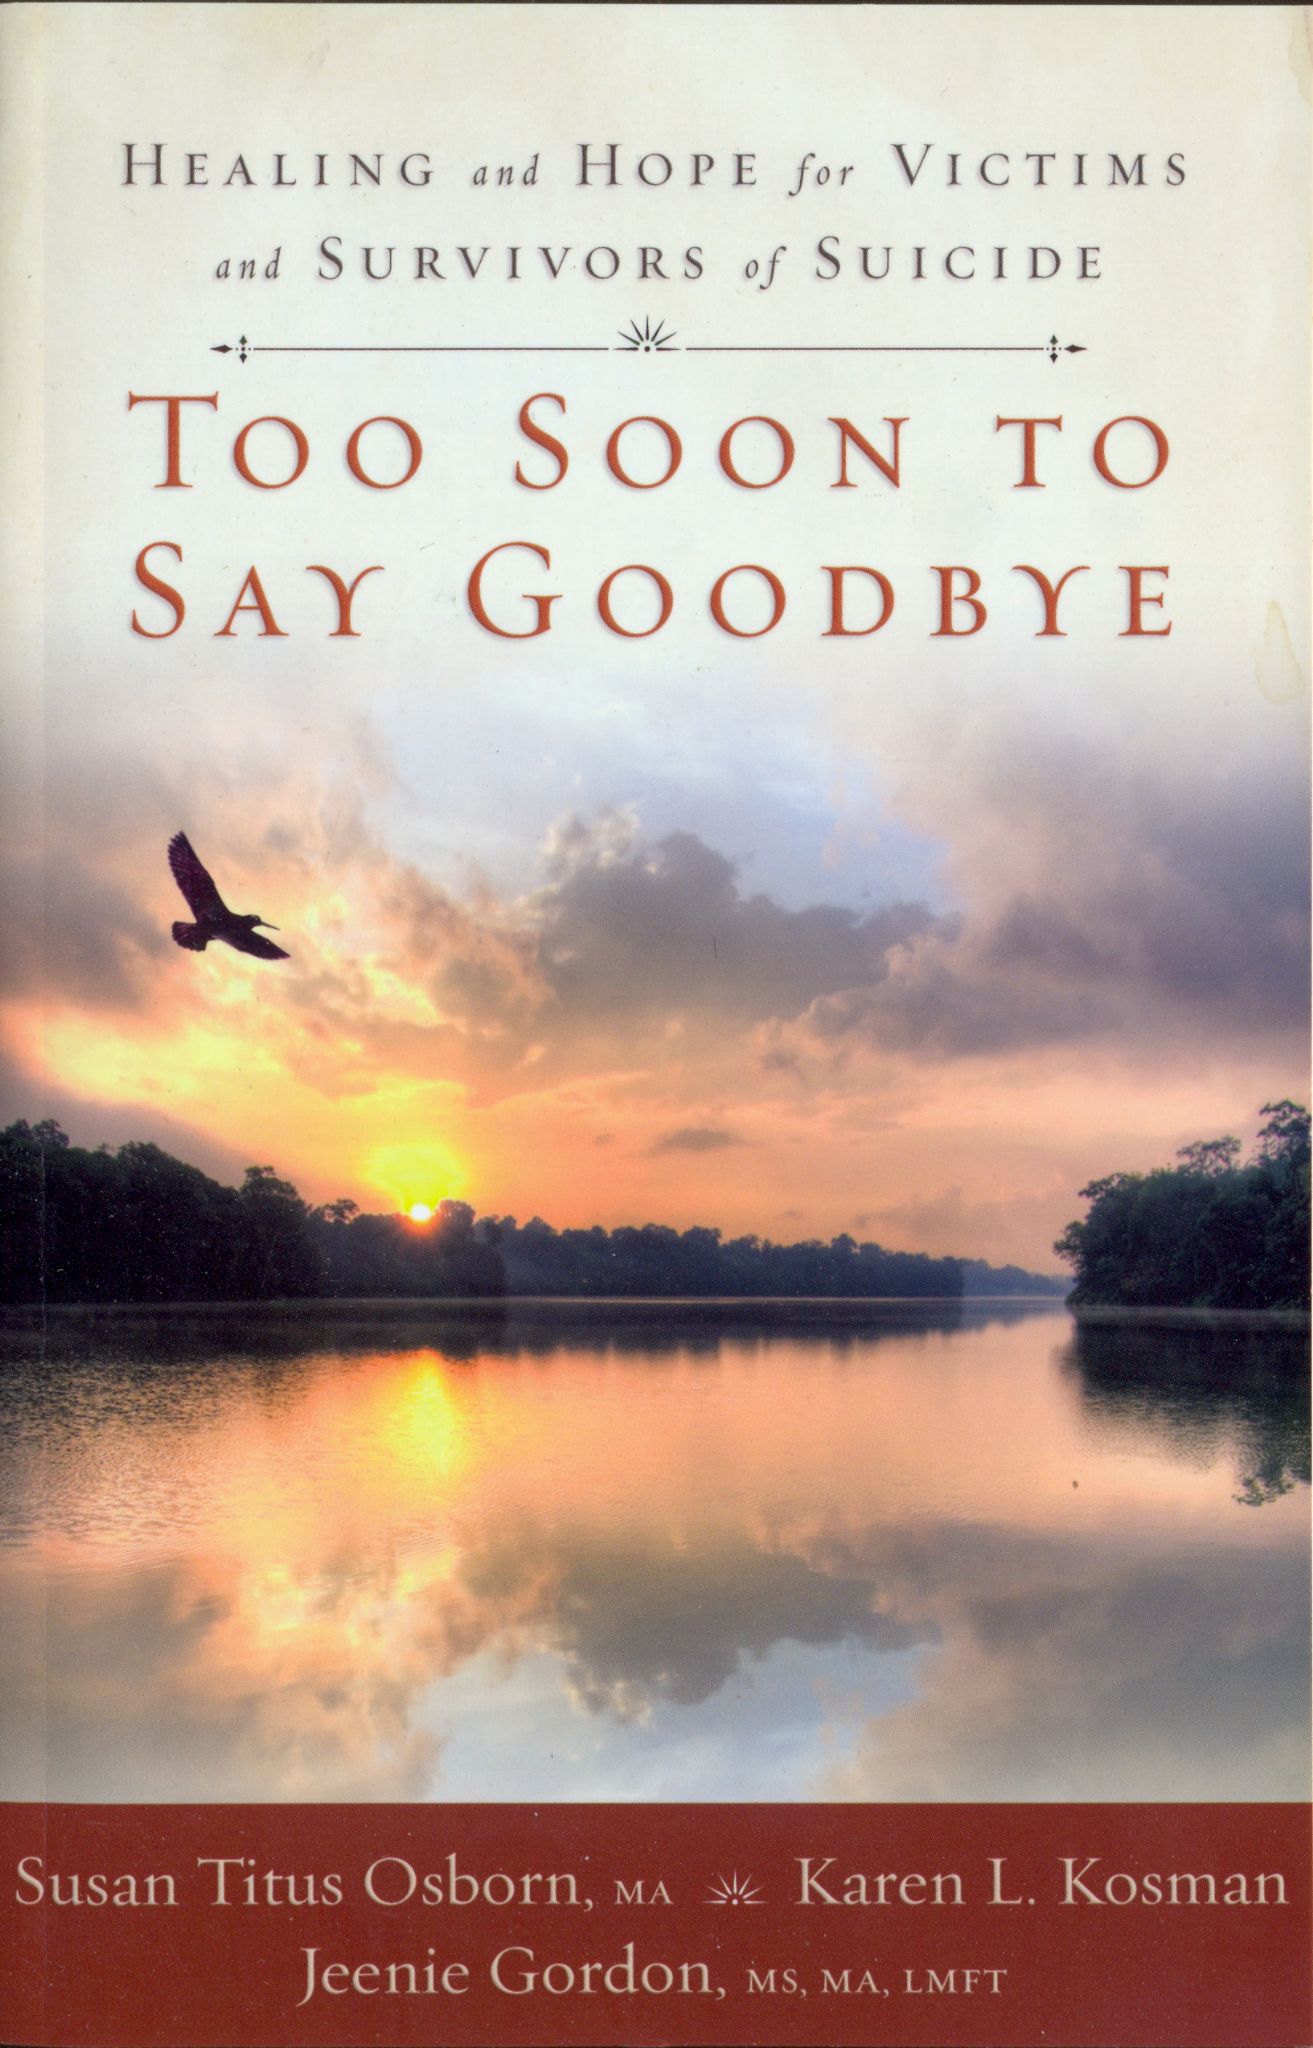 Too Soon to Say Goodbye - Healing and Hope for Victims and Survivors of Suicide